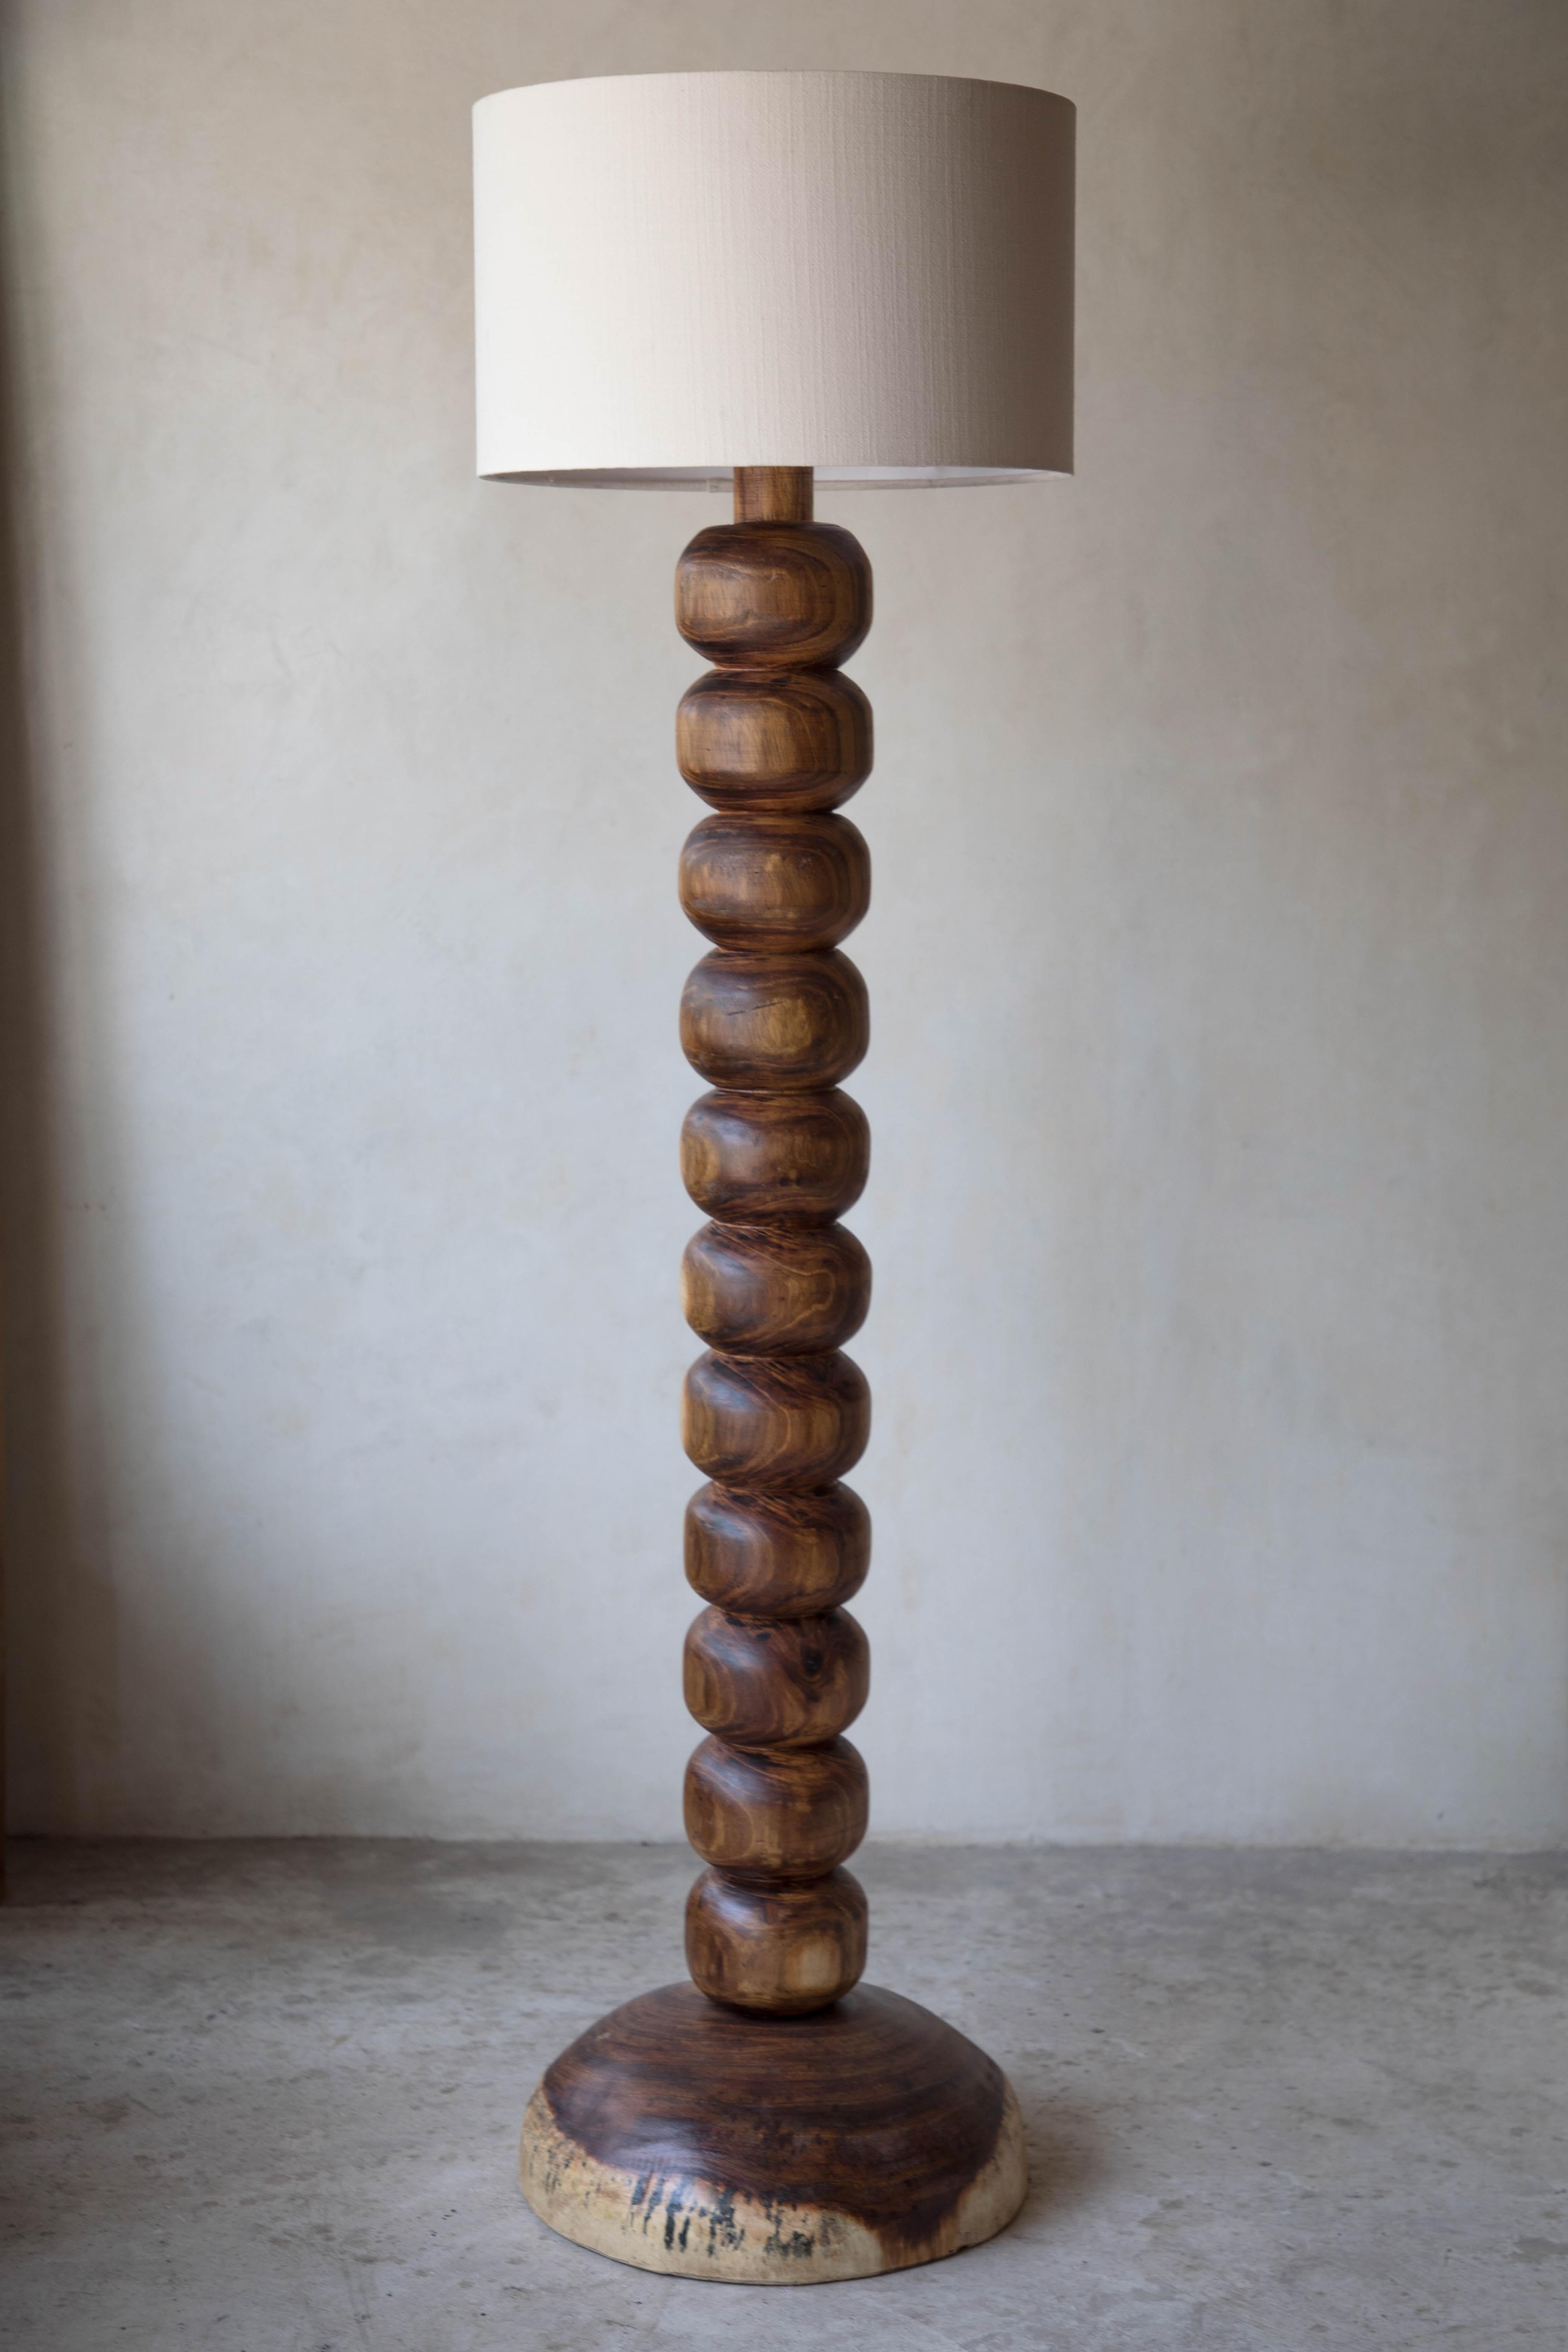 Natural jabin wood floor lamp with linen screen by Daniel Orozco
Material: Jabin wood, linen.
Dimensions: D 39.9 x H 159.8 cm
Available in palm or linen lampshade and in natural or black wood finish.
Available in 2 sizes: D 30 x H 110, D 40 x H